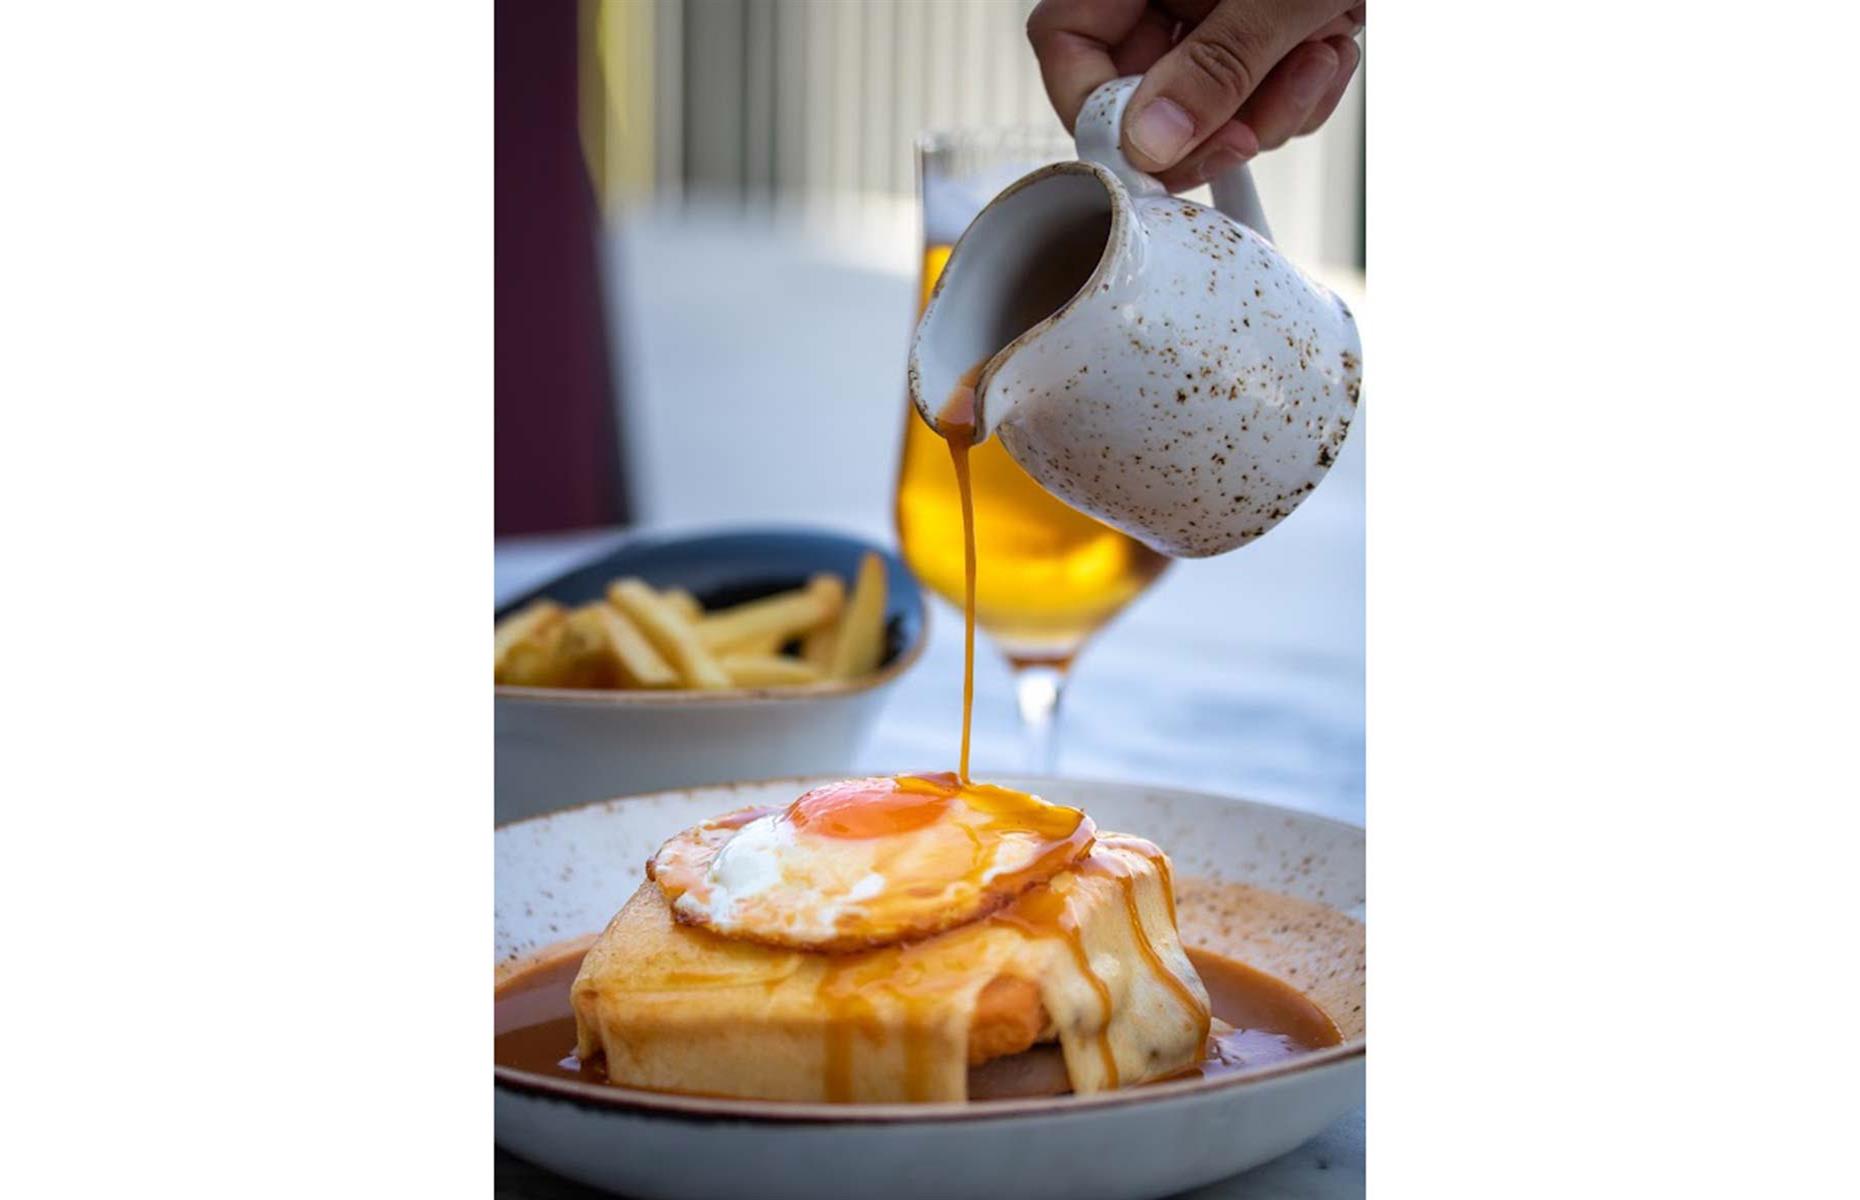 <p>At its core, the francesinha is a sandwich filled with layers of cured meats, such as linguiça, fresh sausage, steak, and ham, topped with a gooey layer of melted cheese and then all smothered in a rich tomato and beer sauce. Locals will say it must be crowned with a perfectly fried egg and served with the crunchiest matchstick fries imaginable. This carb-heavy comfort food is both savory and spicy, and perfect for the day after some heavy wine sampling.</p>